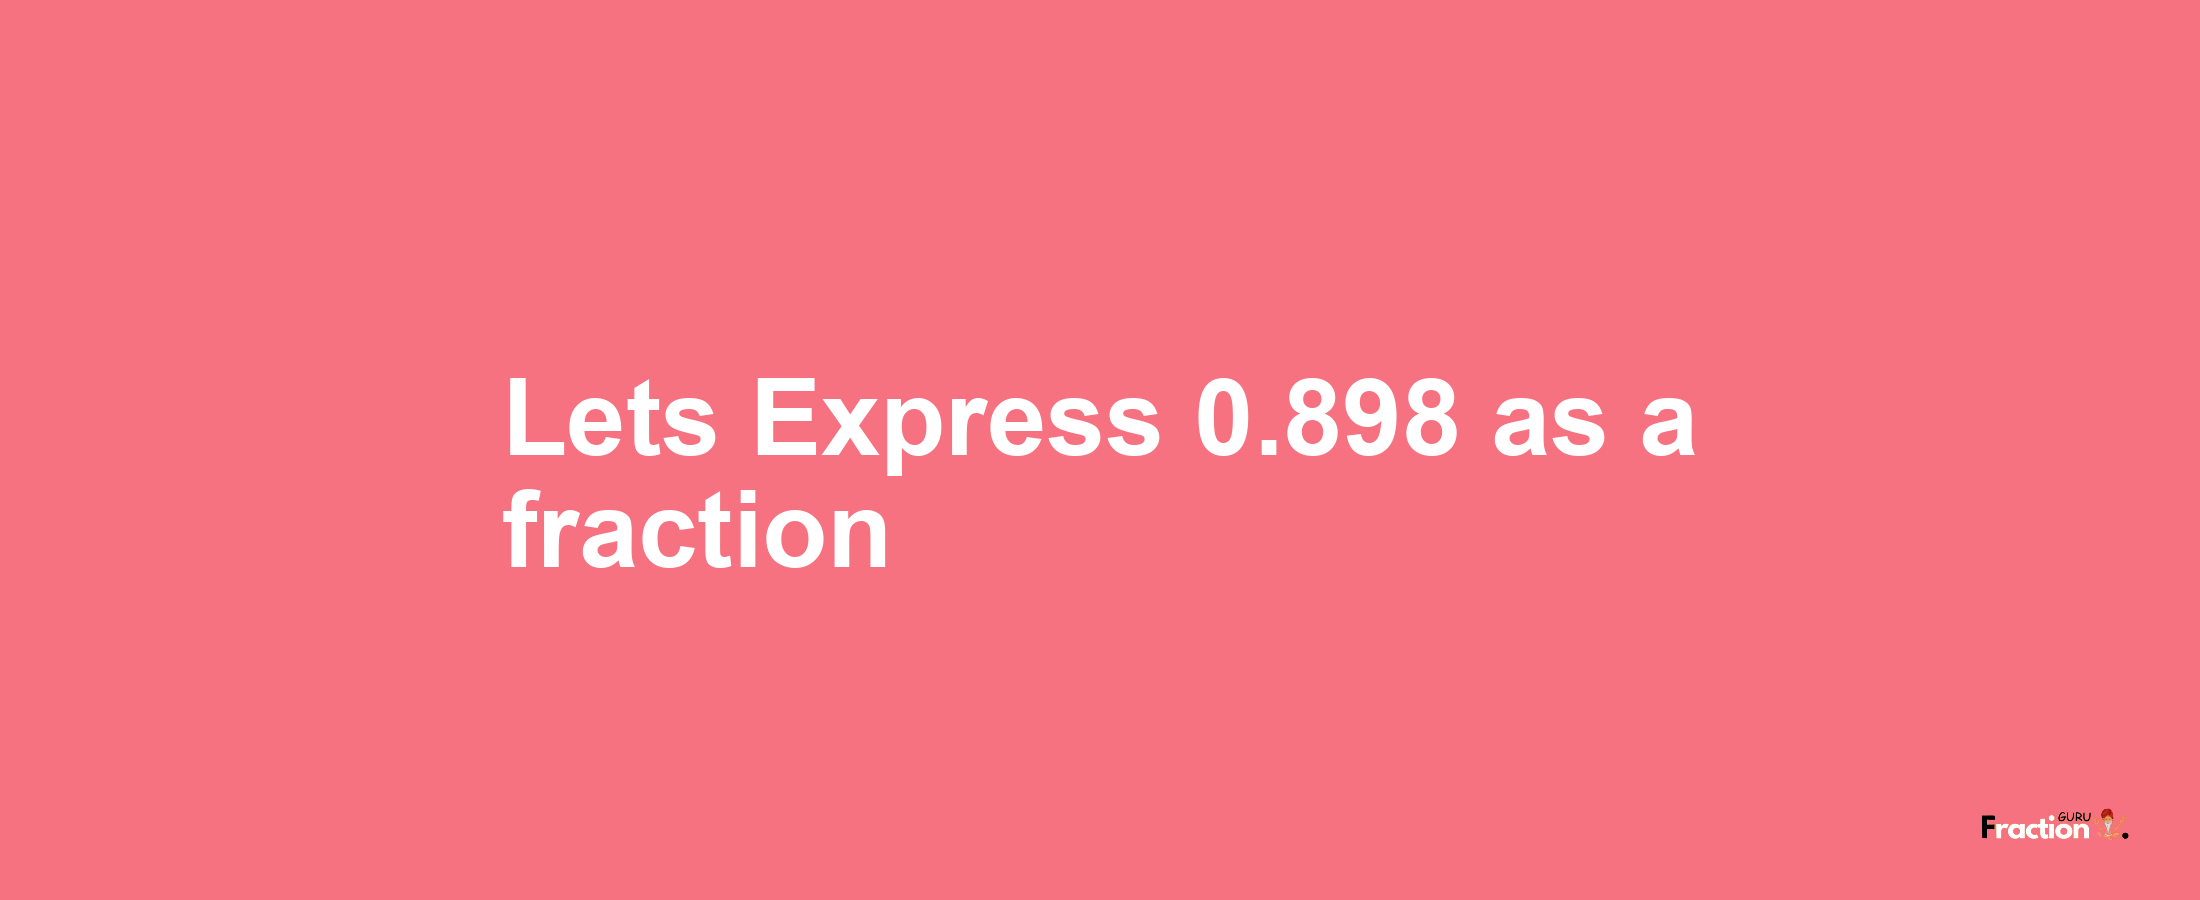 Lets Express 0.898 as afraction